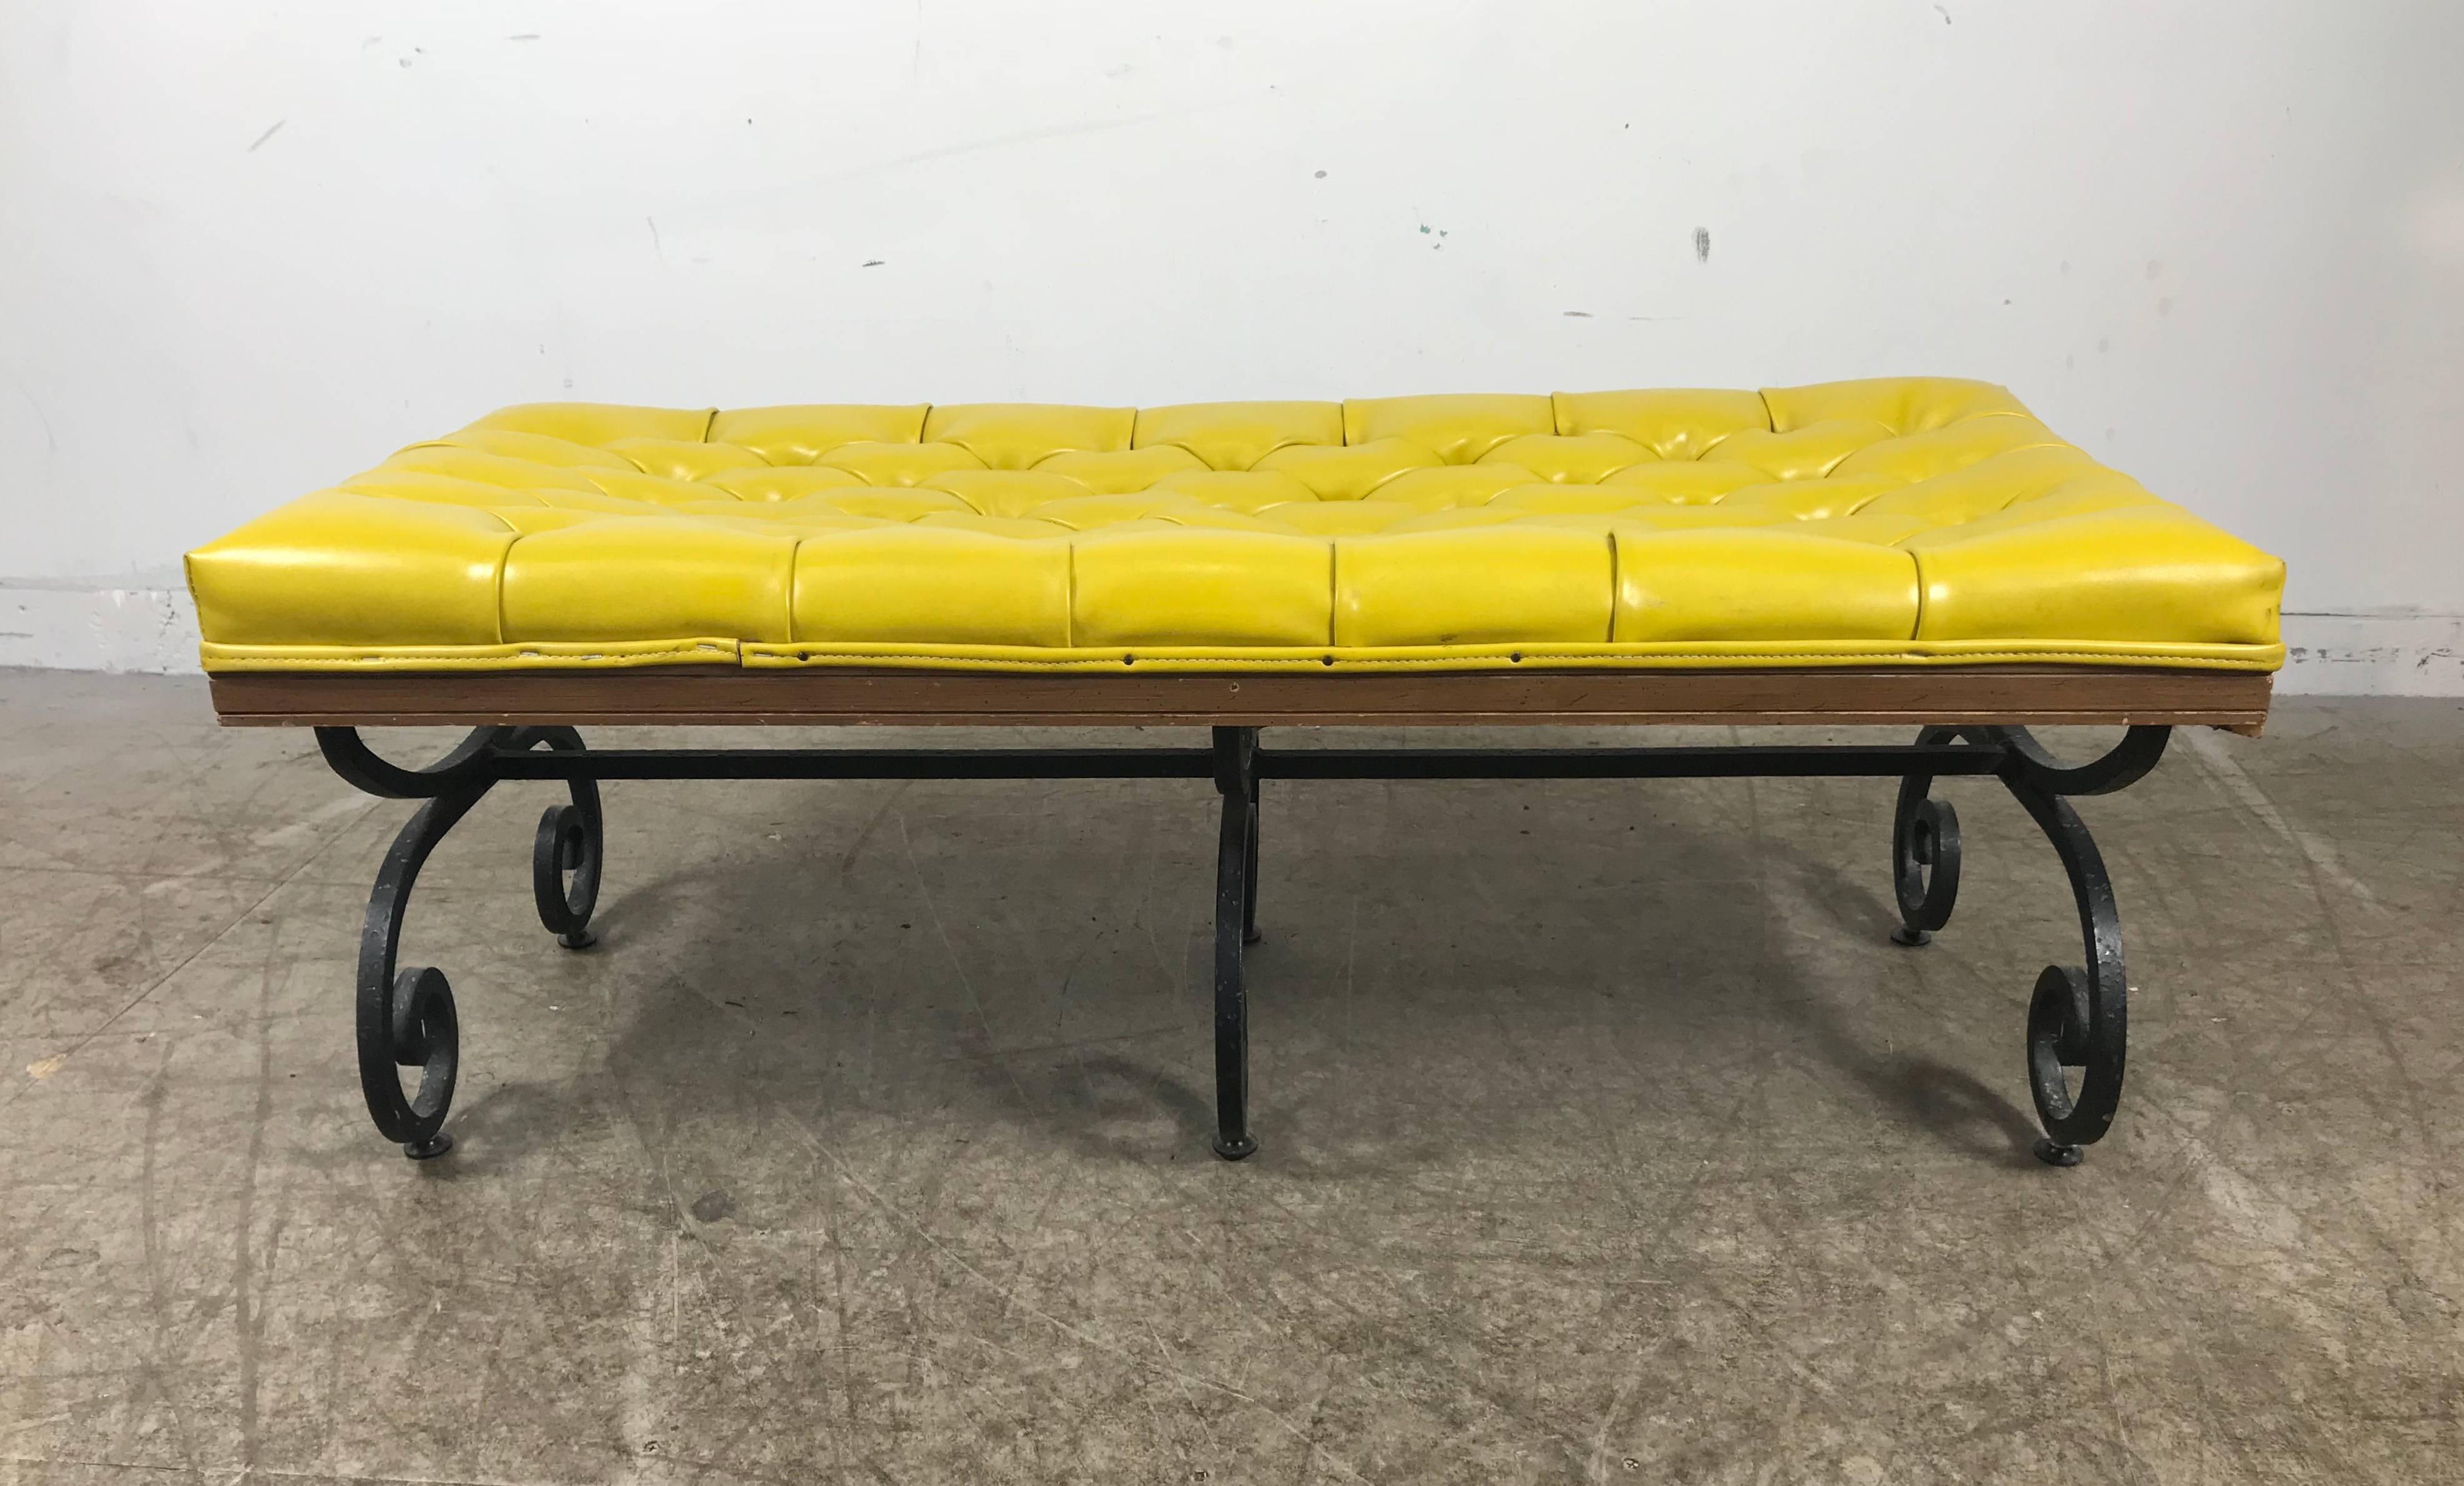 Midcentury iron and tufted leather bench by Gilliam Furniture Inc. Outrageous mustard color tufted leather. Heavy gauge hammered regency style wrought iron wood trim.